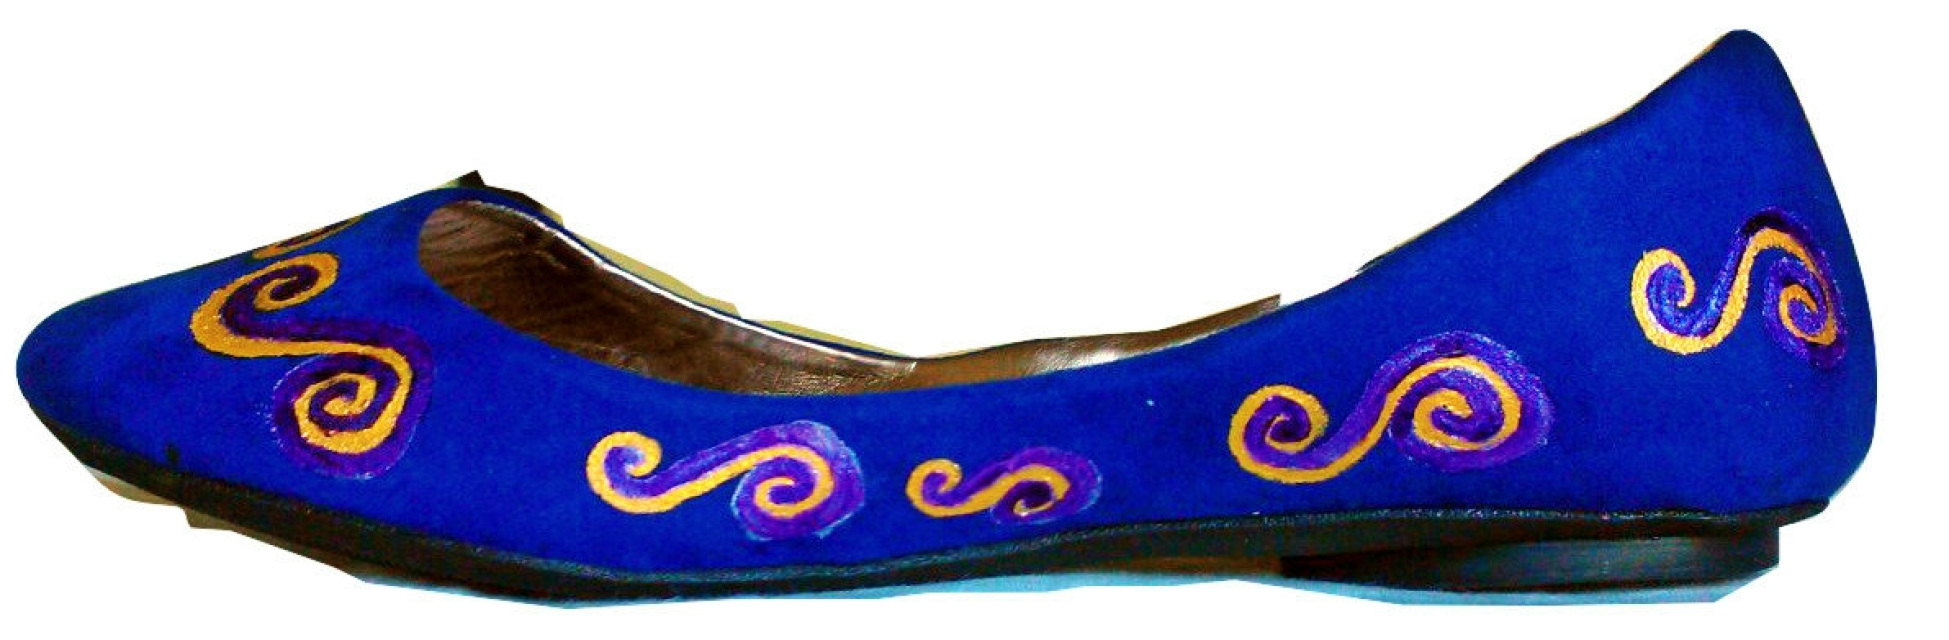 Upcycled Hand Painted Shoes Womans flats celtic swirls purple Gold blue ...